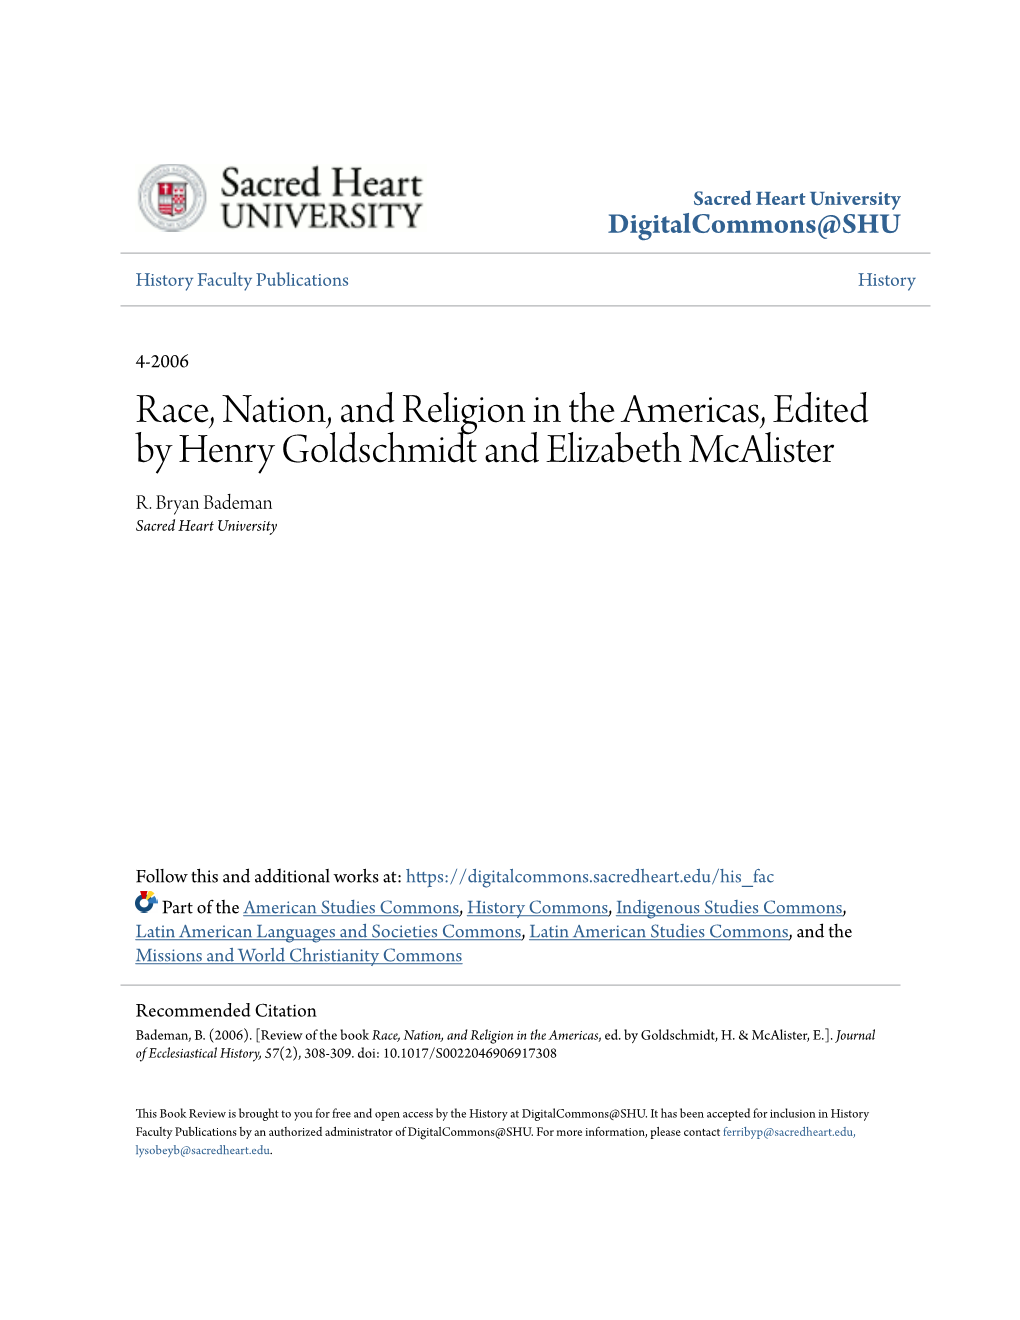 Race, Nation, and Religion in the Americas, Edited by Henry Goldschmidt and Elizabeth Mcalister R